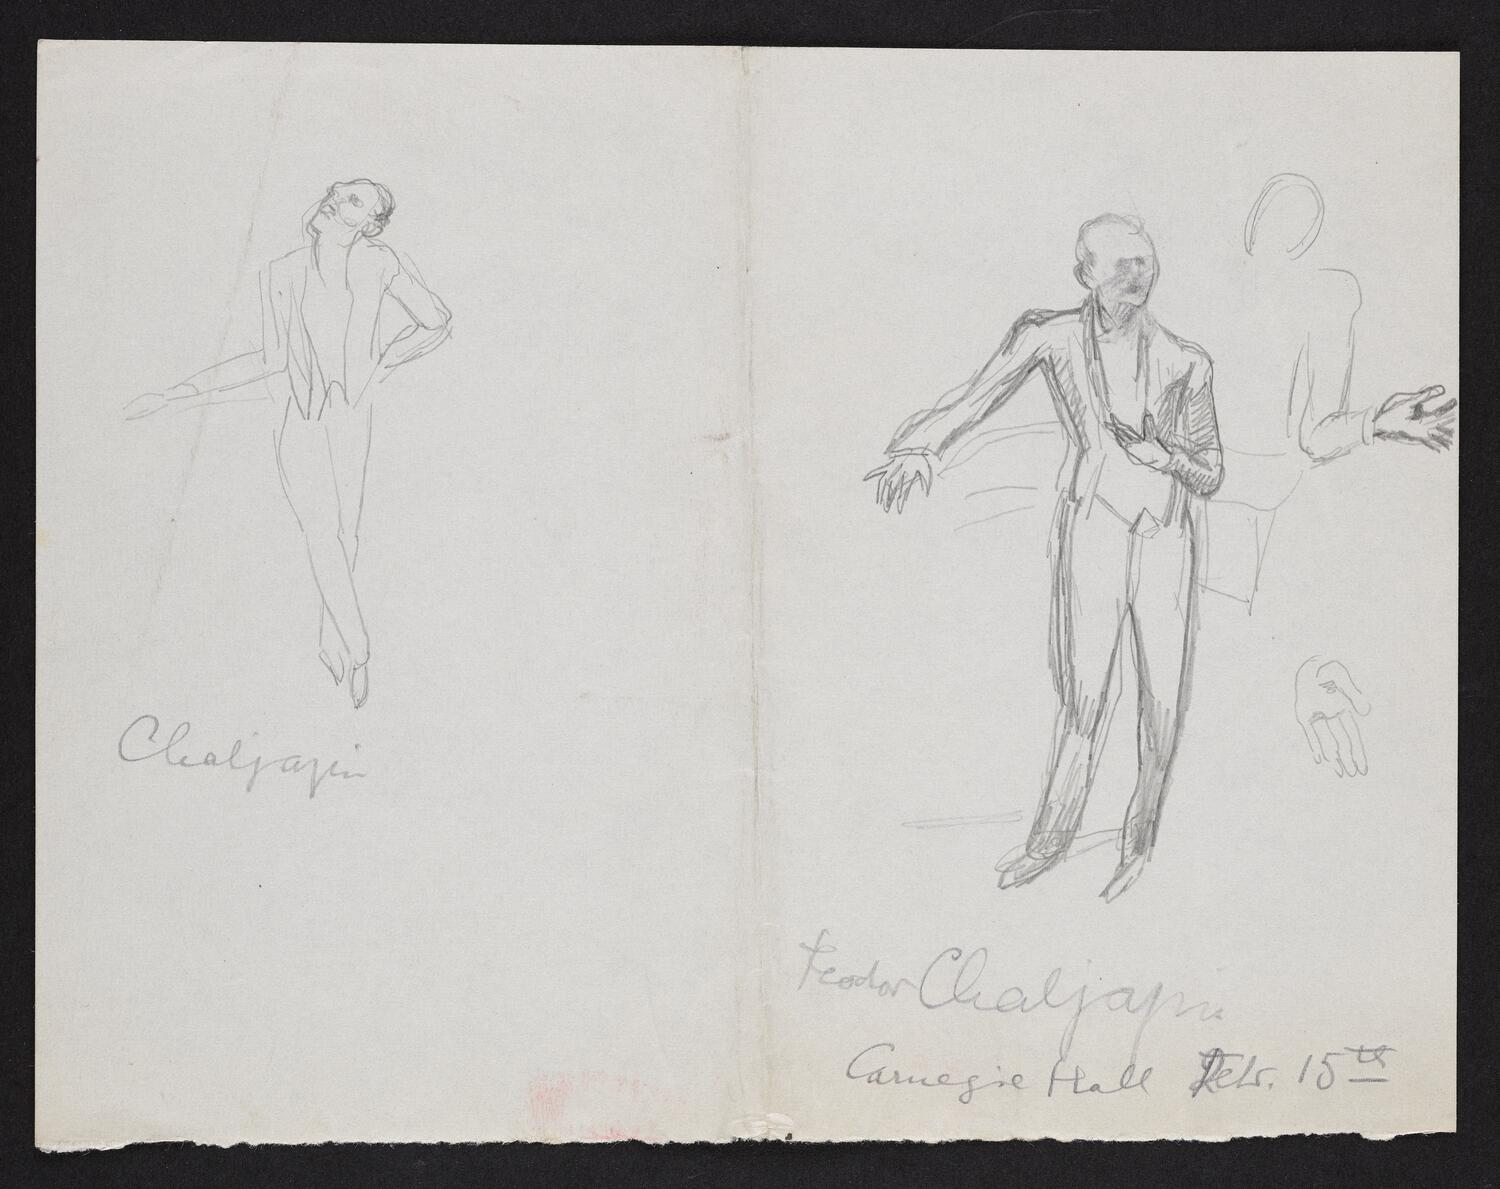 Sketches of Fyodor Chaliapin facing the viewer